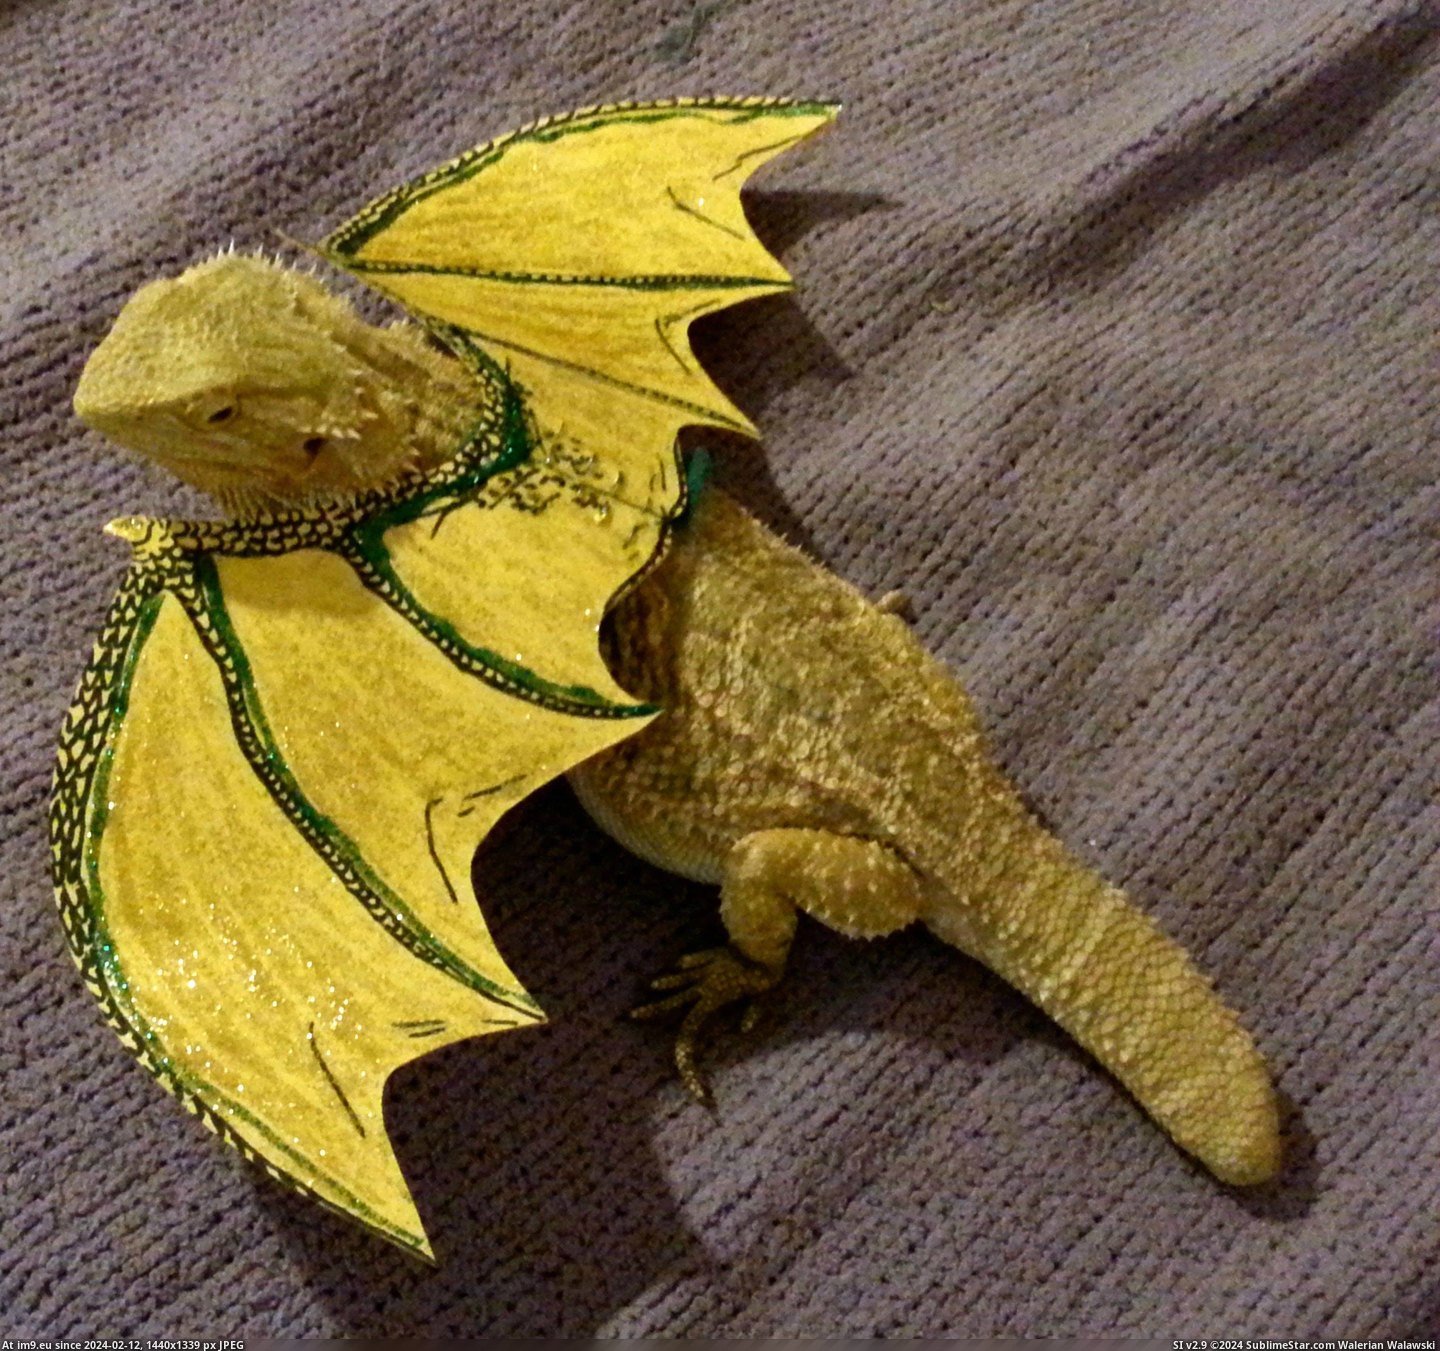 #For #Girlfriend #Dress #Bearded #Insisted #Halloween #Our #Dragon [Pics] My girlfriend insisted we dress our bearded dragon up for Halloween Pic. (Bild von album My r/PICS favs))